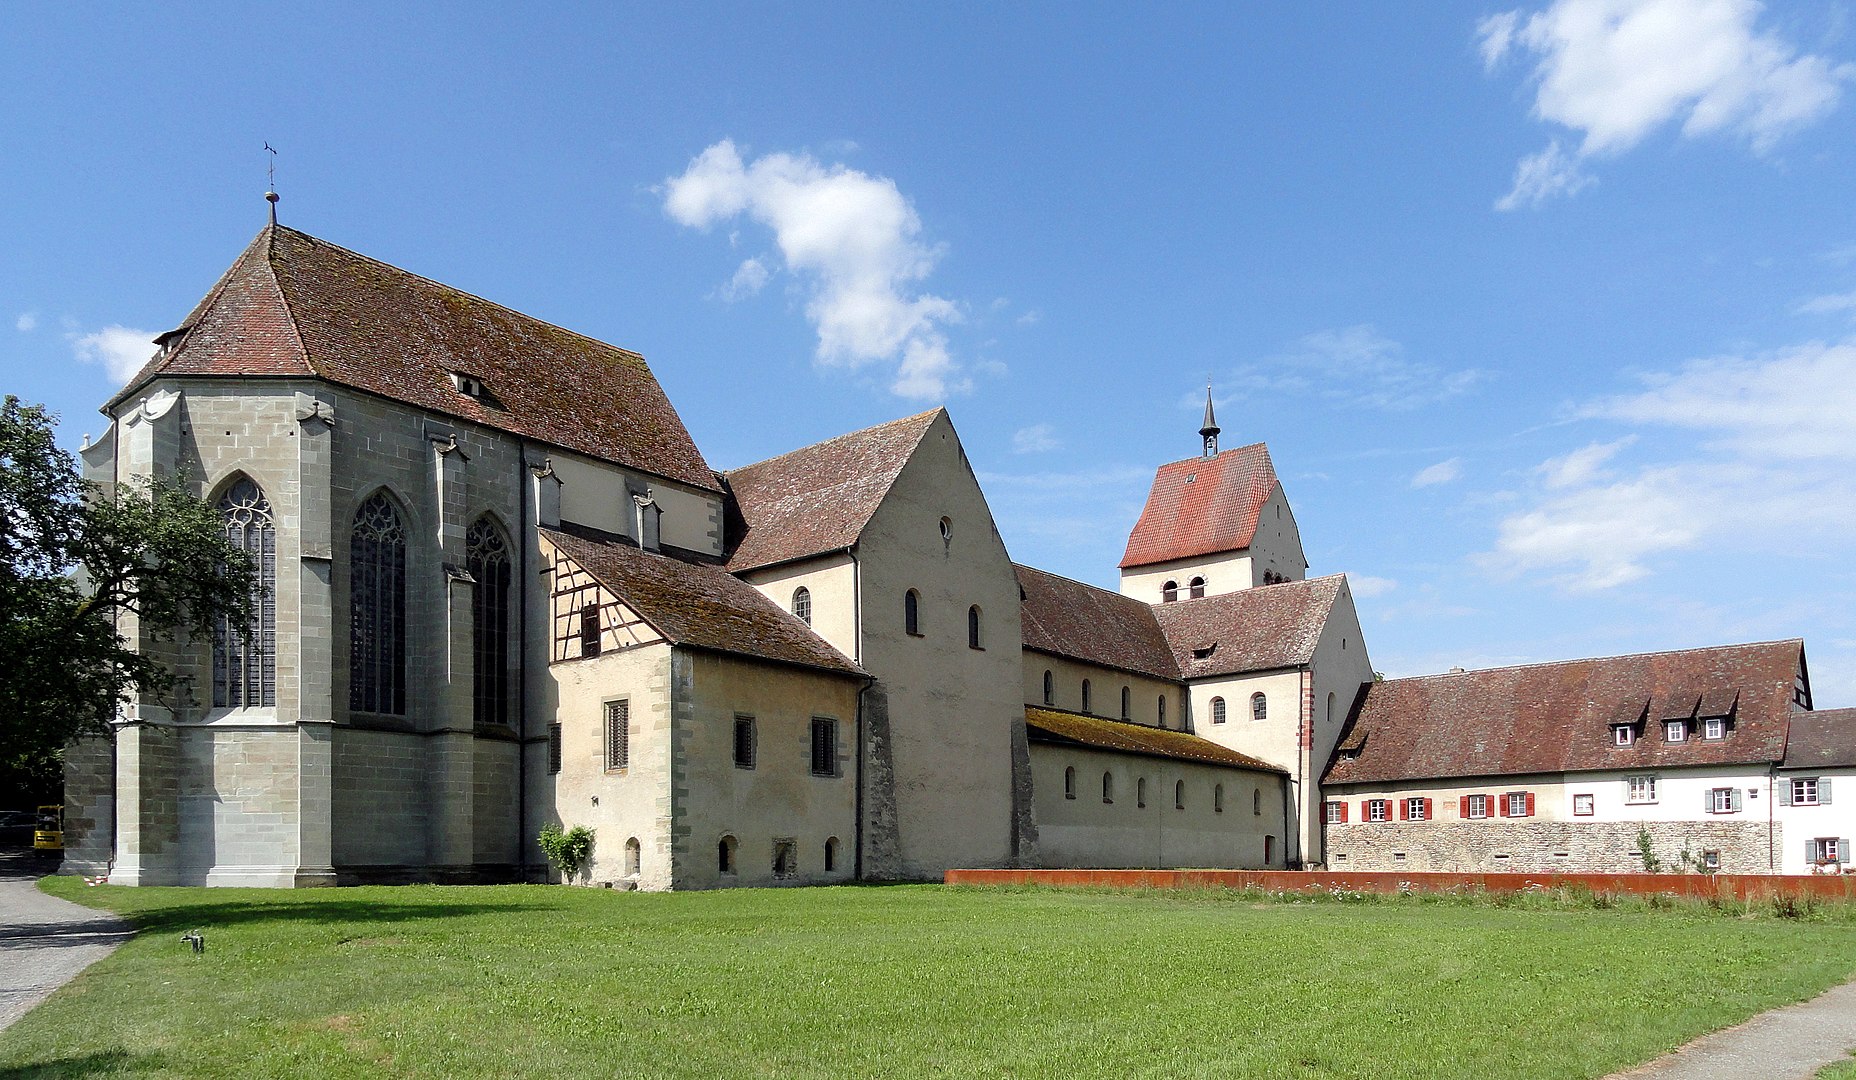 Monastery and cloisters of Reichenau